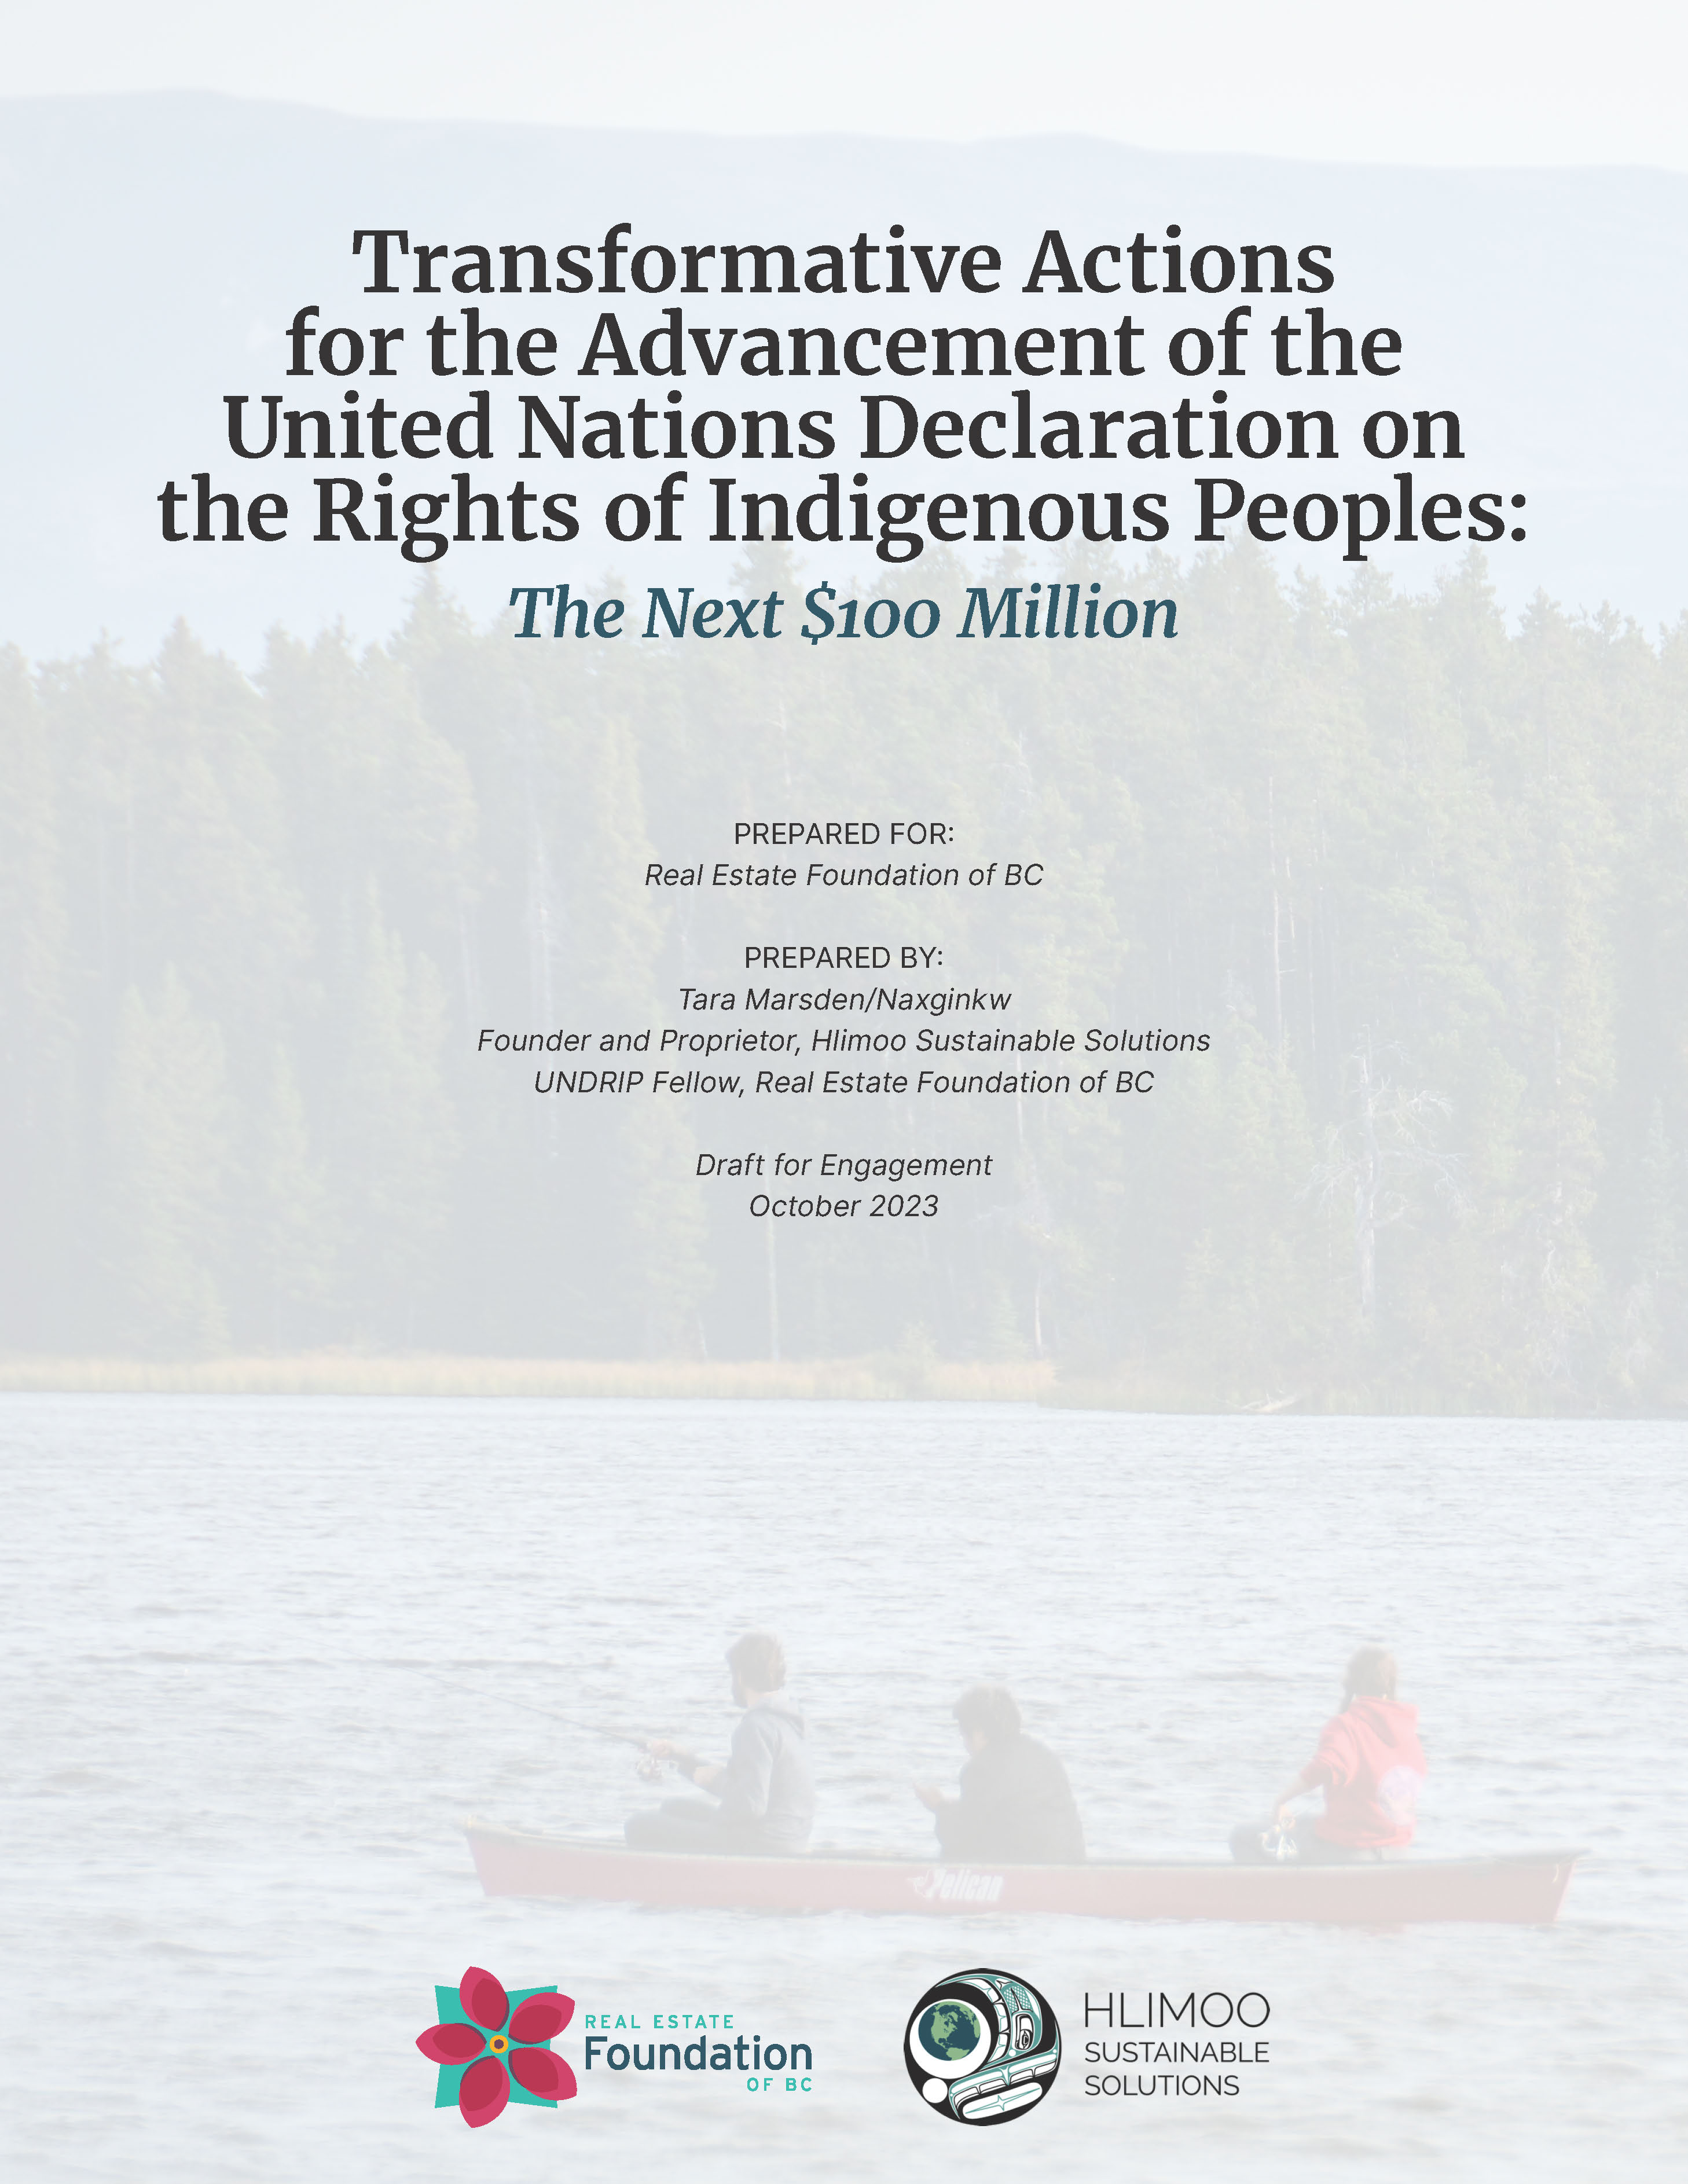 Transformative Actions for the Advancement of UNDRIP